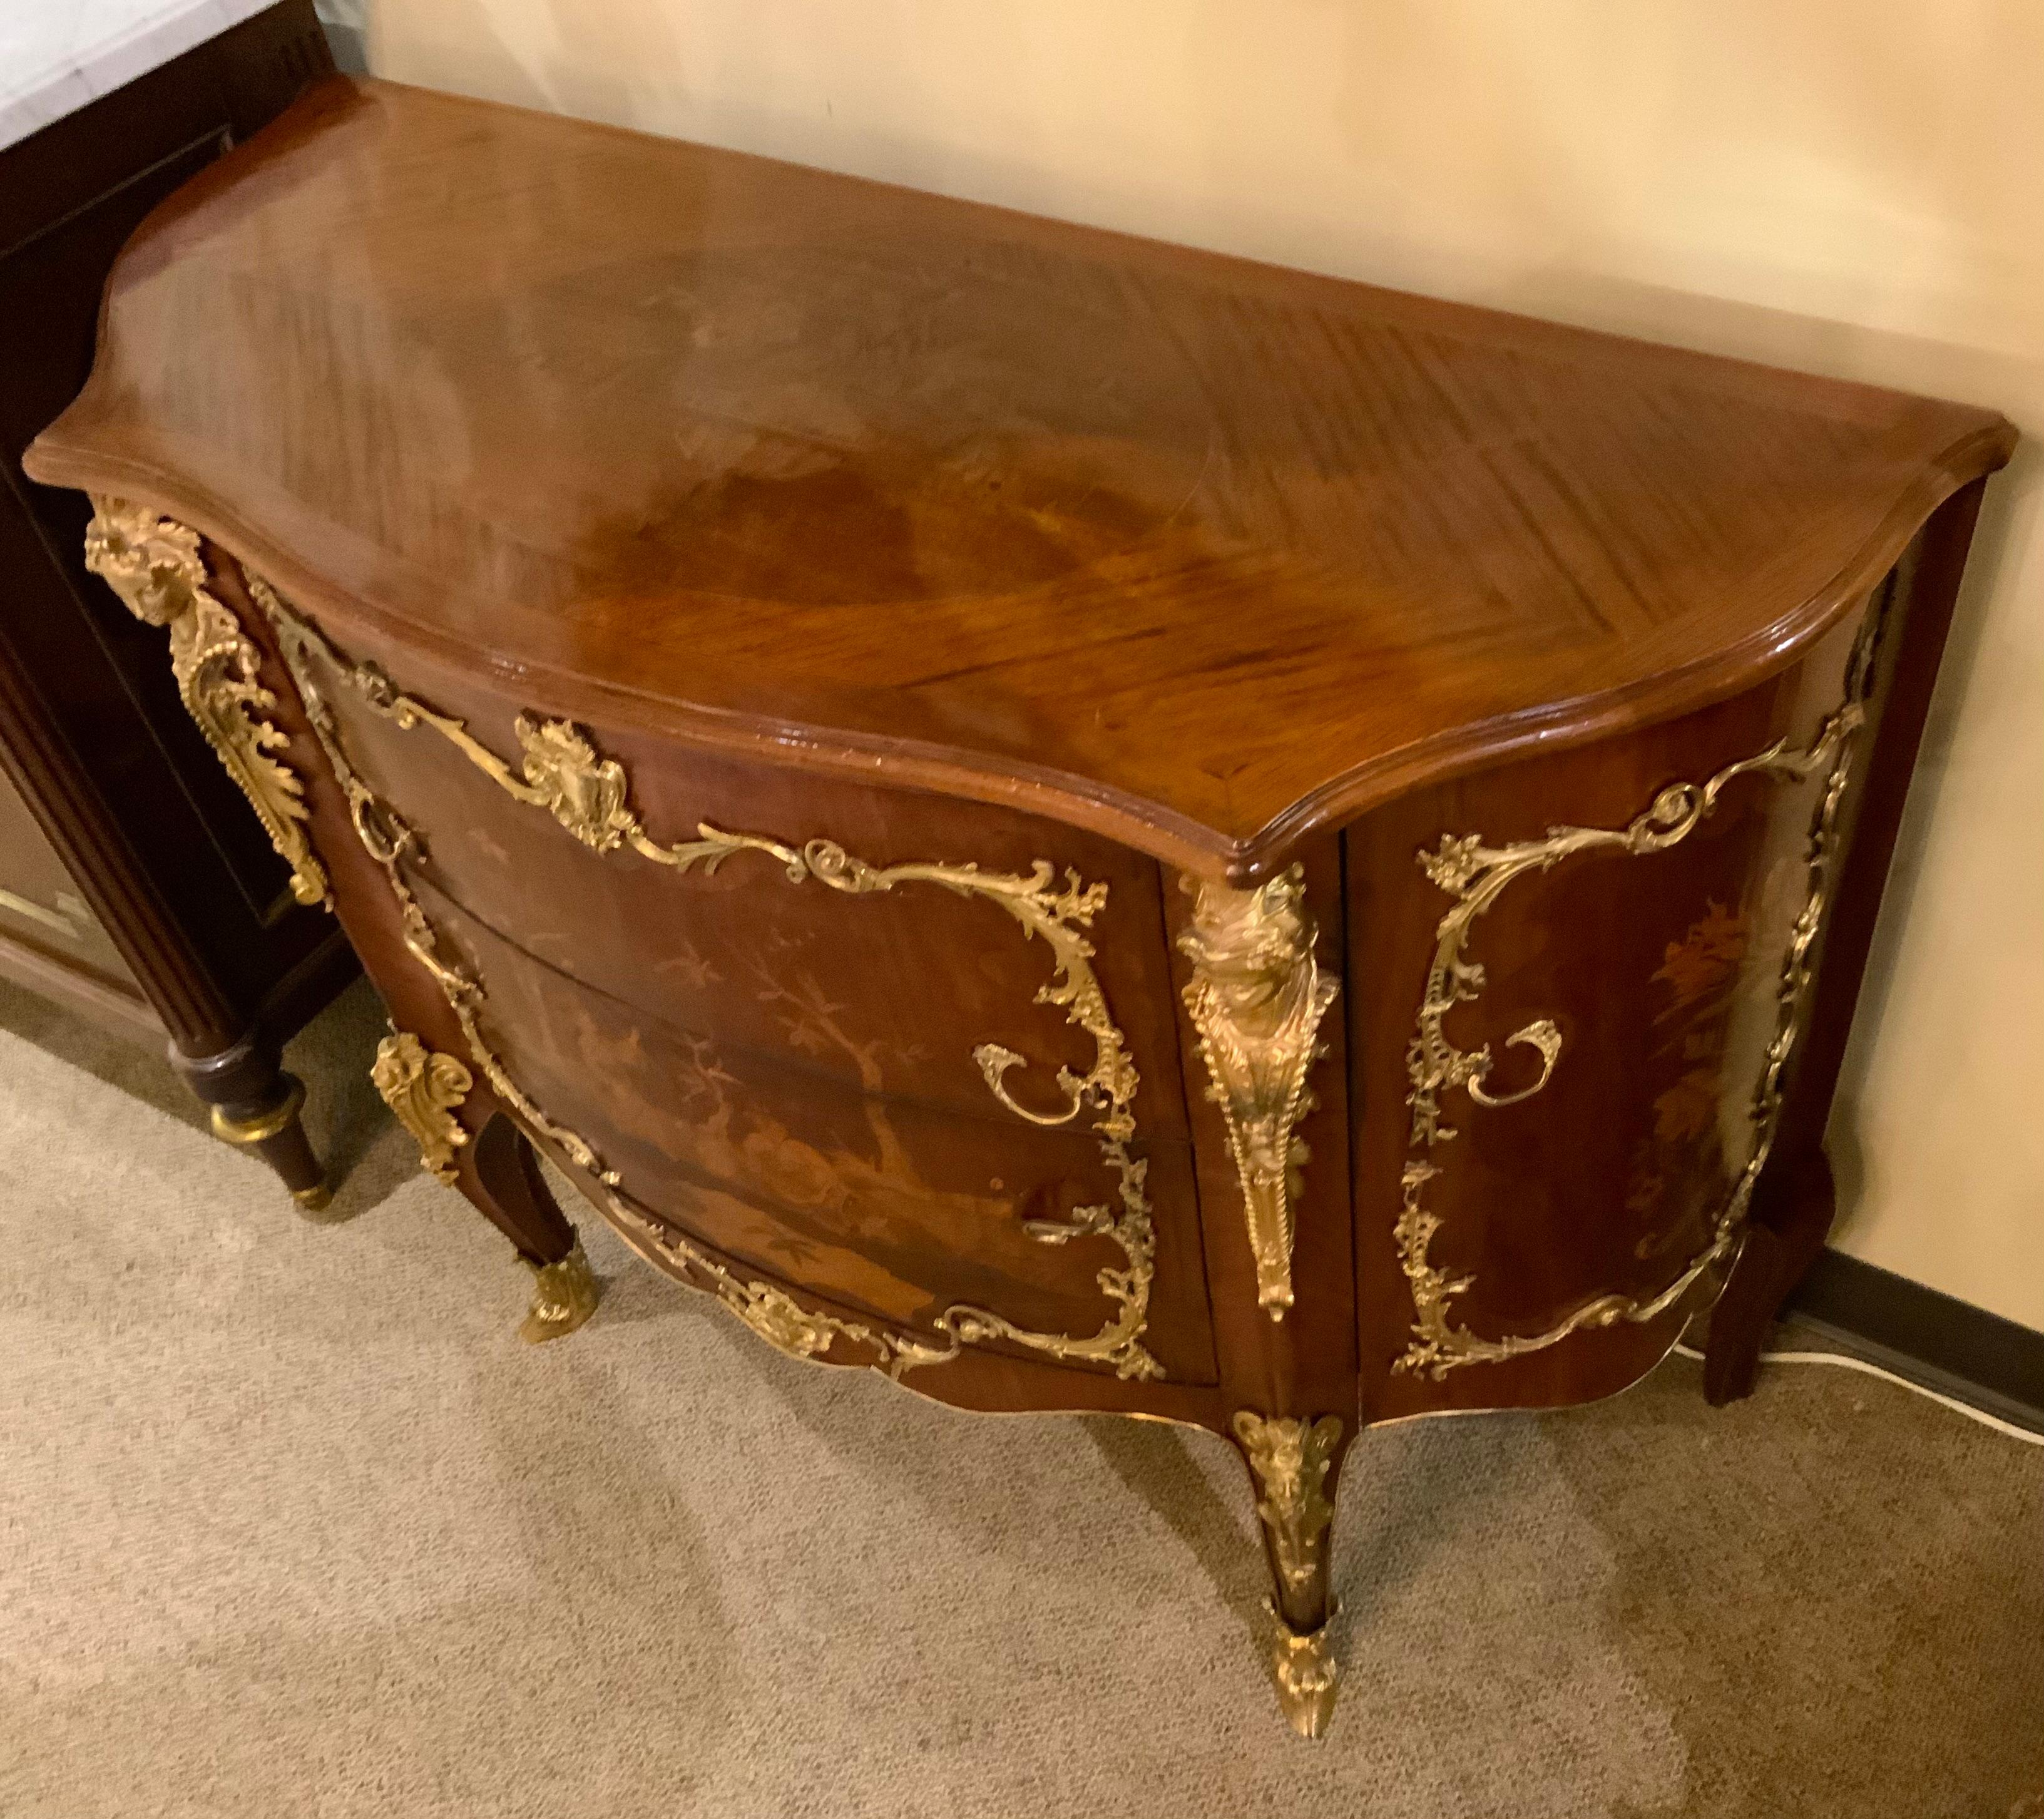 Pair of Louis XIV-Style Mahogany Inlaid Marquetry Commodes, 19th Century For Sale 8